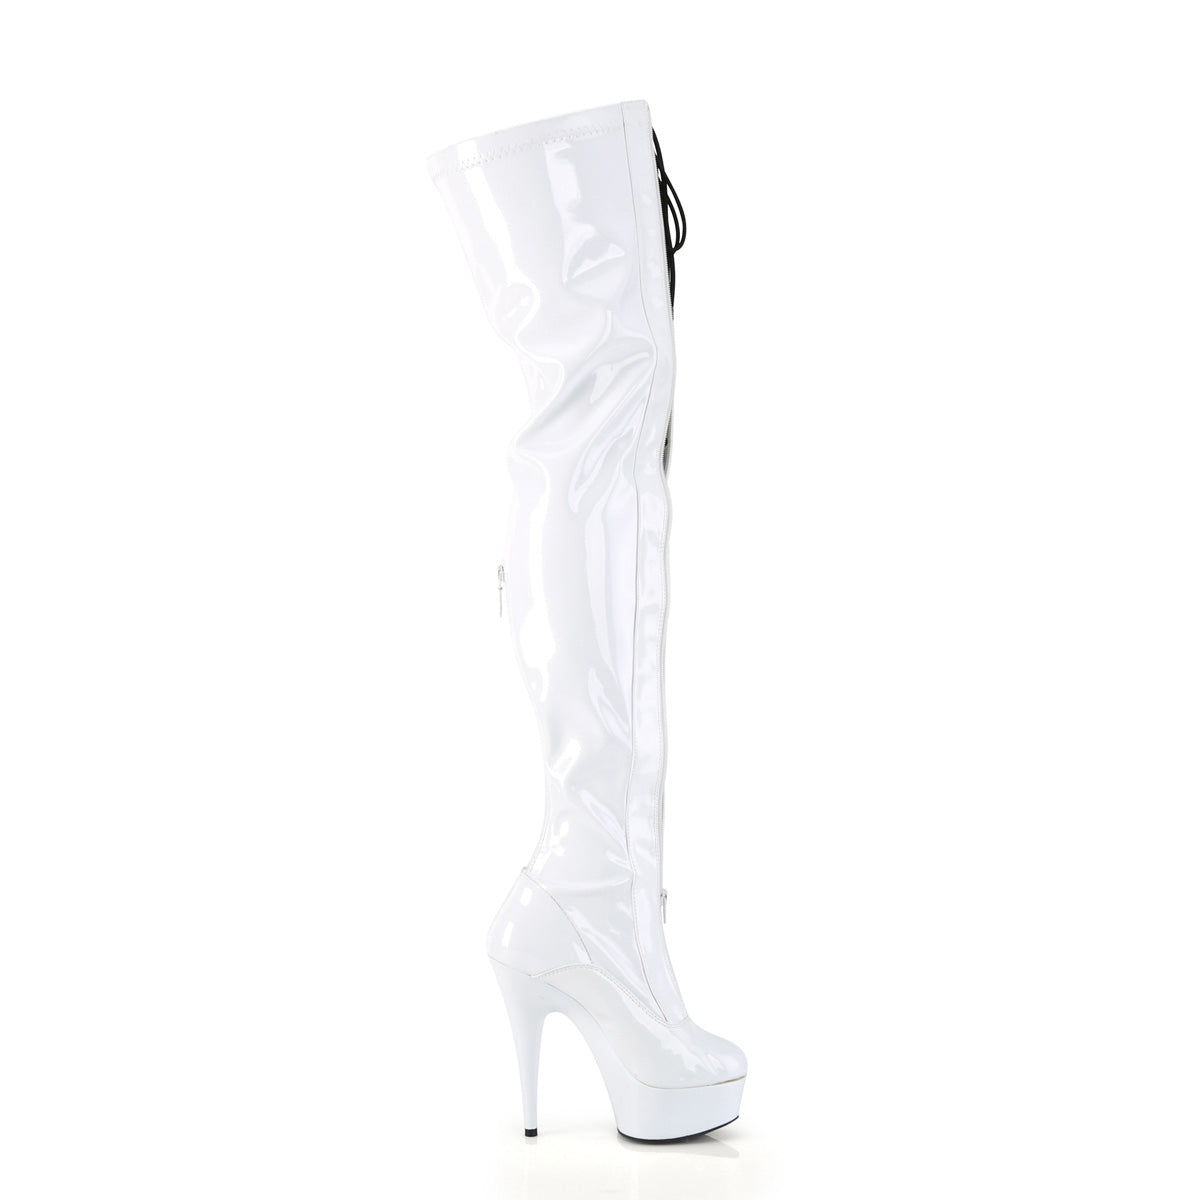 DELIGHT-3027 Pleaser White-Black Stretch Patent/White Platform Shoes [Sexy Thigh High Boots]